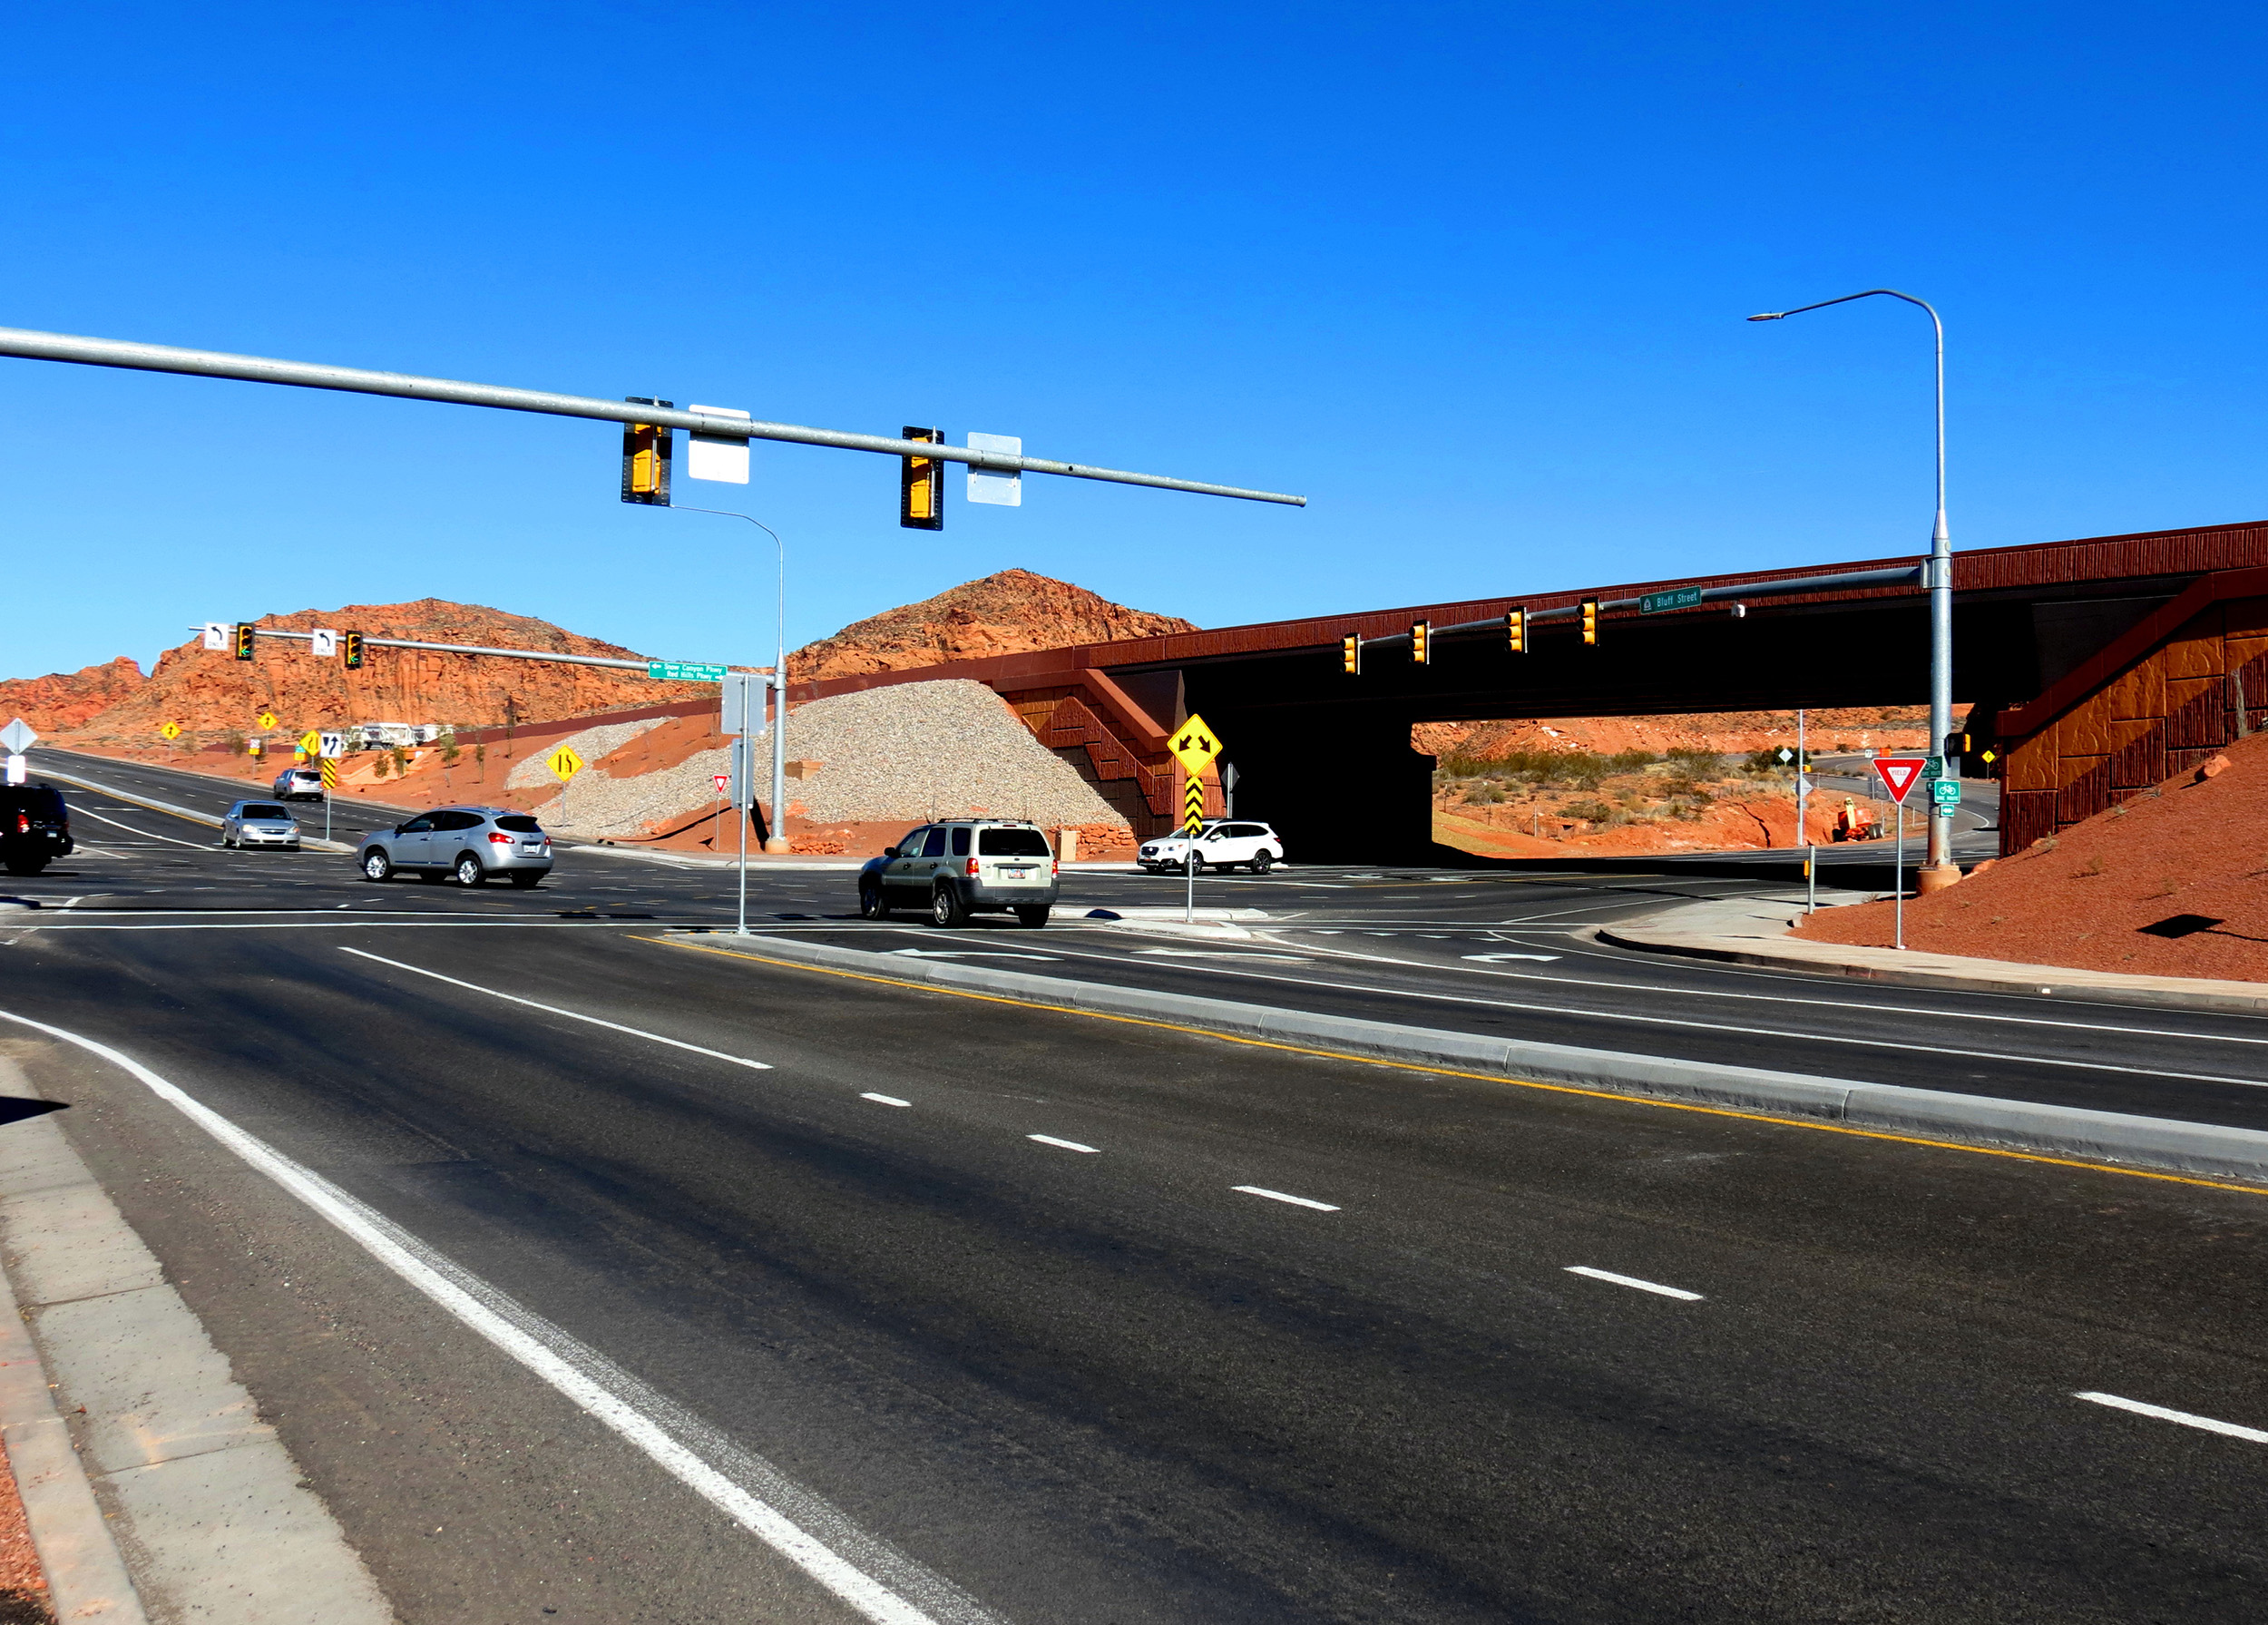 The project uses a Center-exit Interchange which lowers the project costs by utilizing existing pavement and increases safety for pedestrians and trail users.